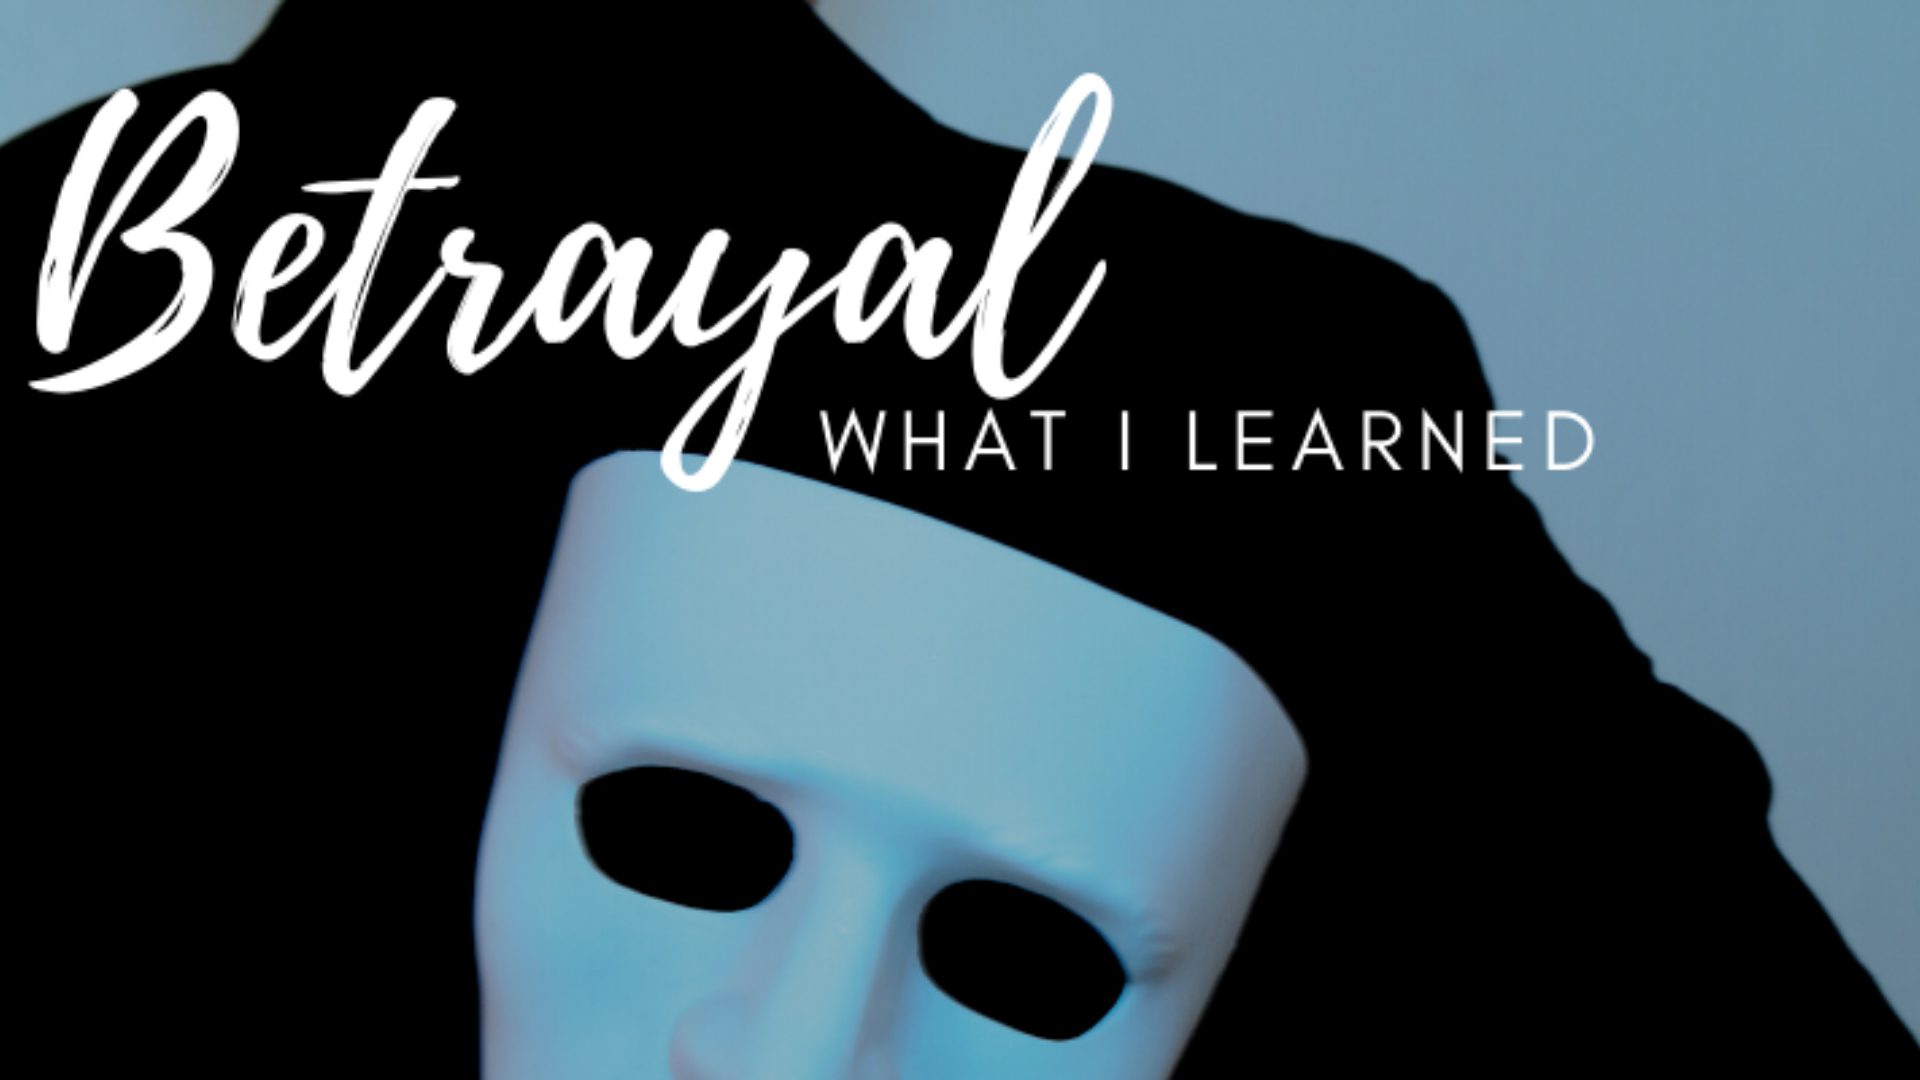 Betrayal: What I Learned